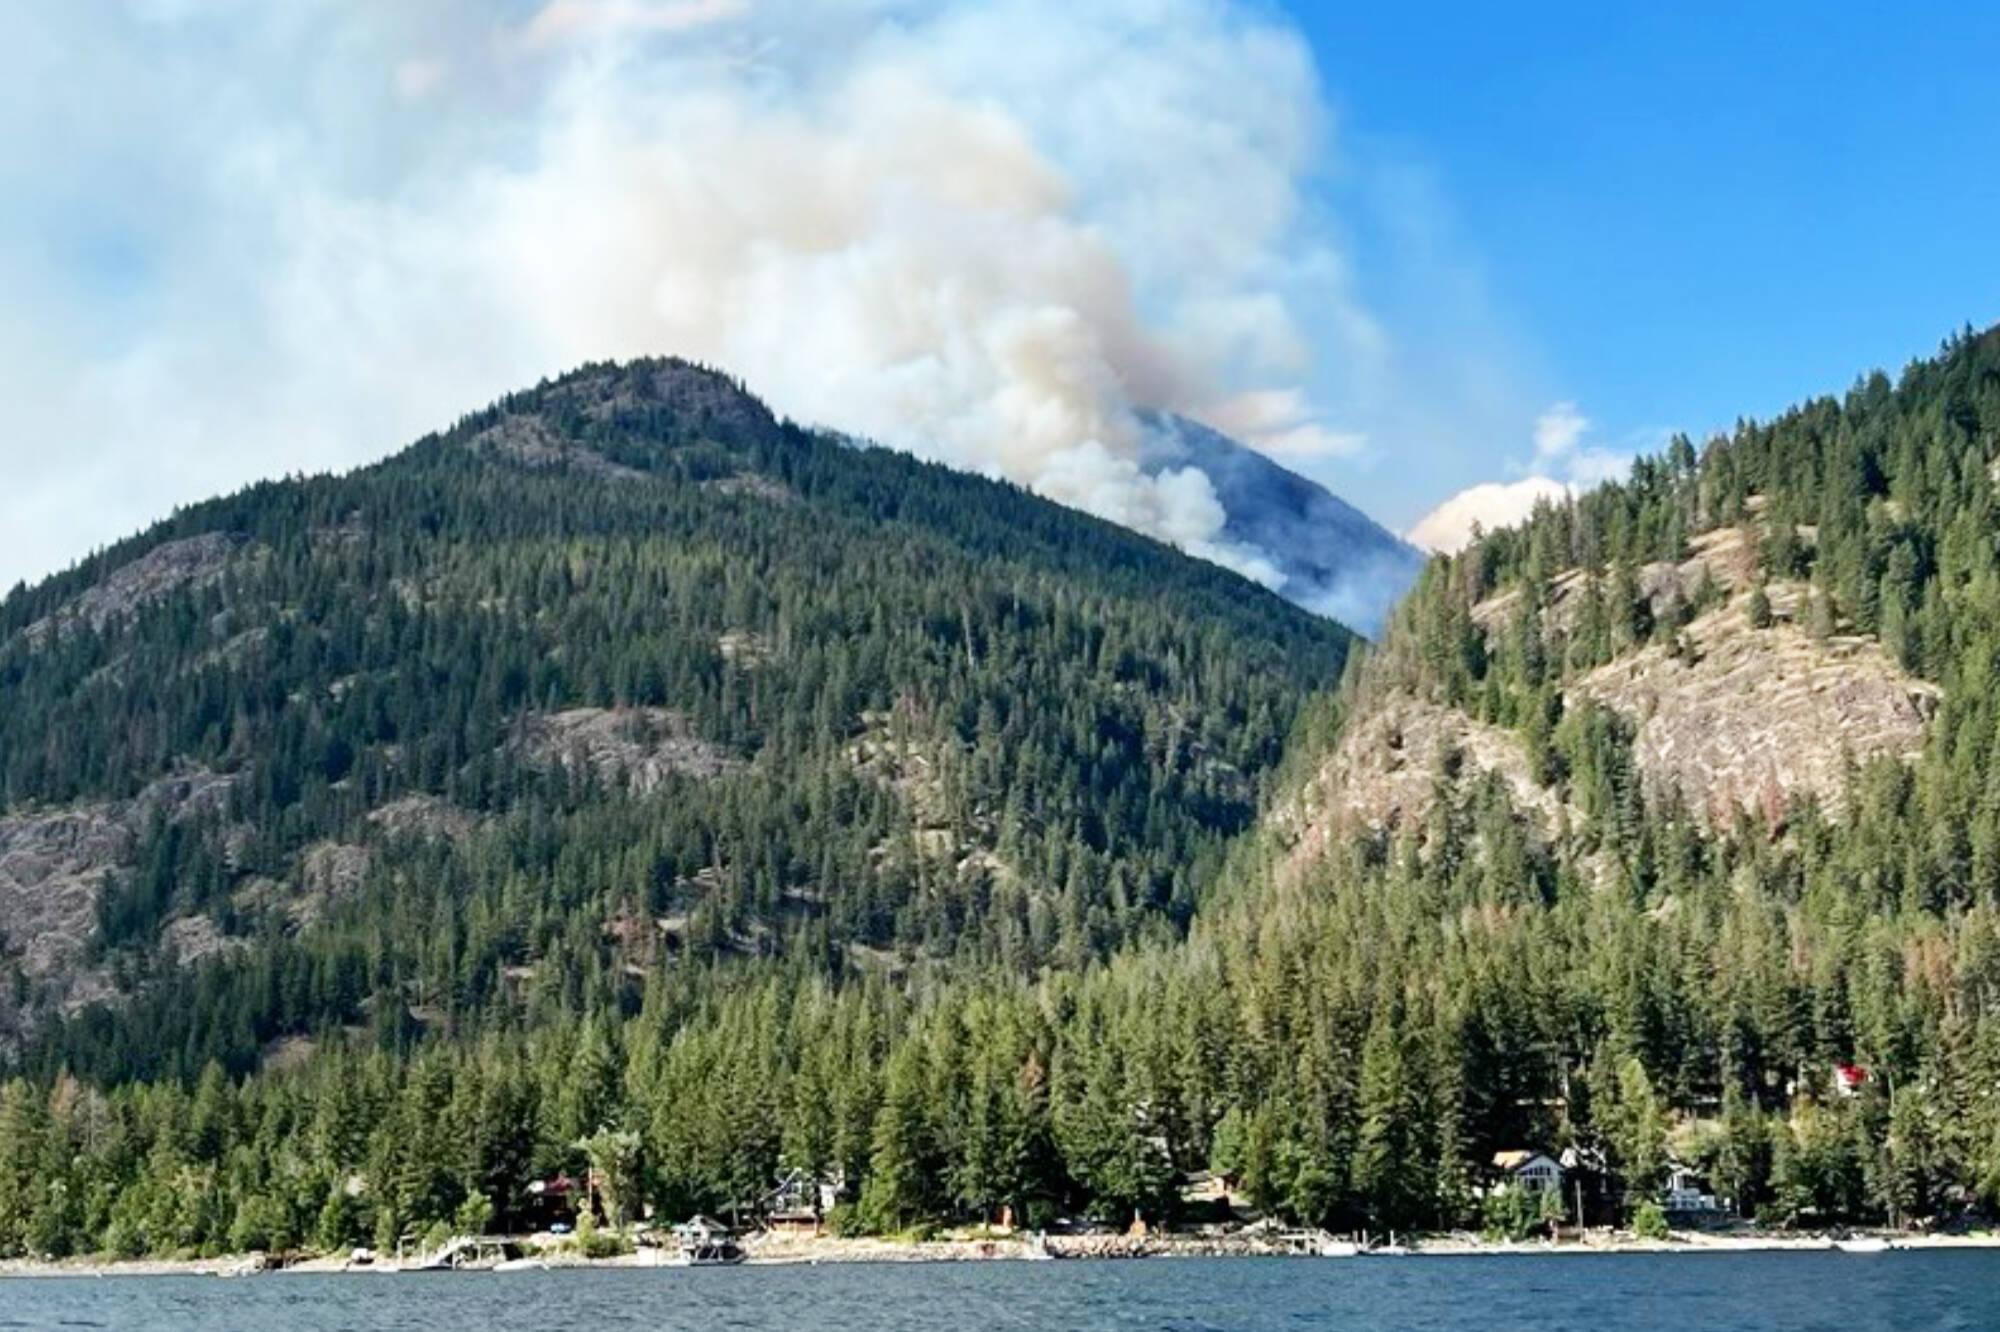 The Lower Adams Lake East wildfire burns in the mountains above lakeshore properties currently under an evacuation alert. (CSRD photo)